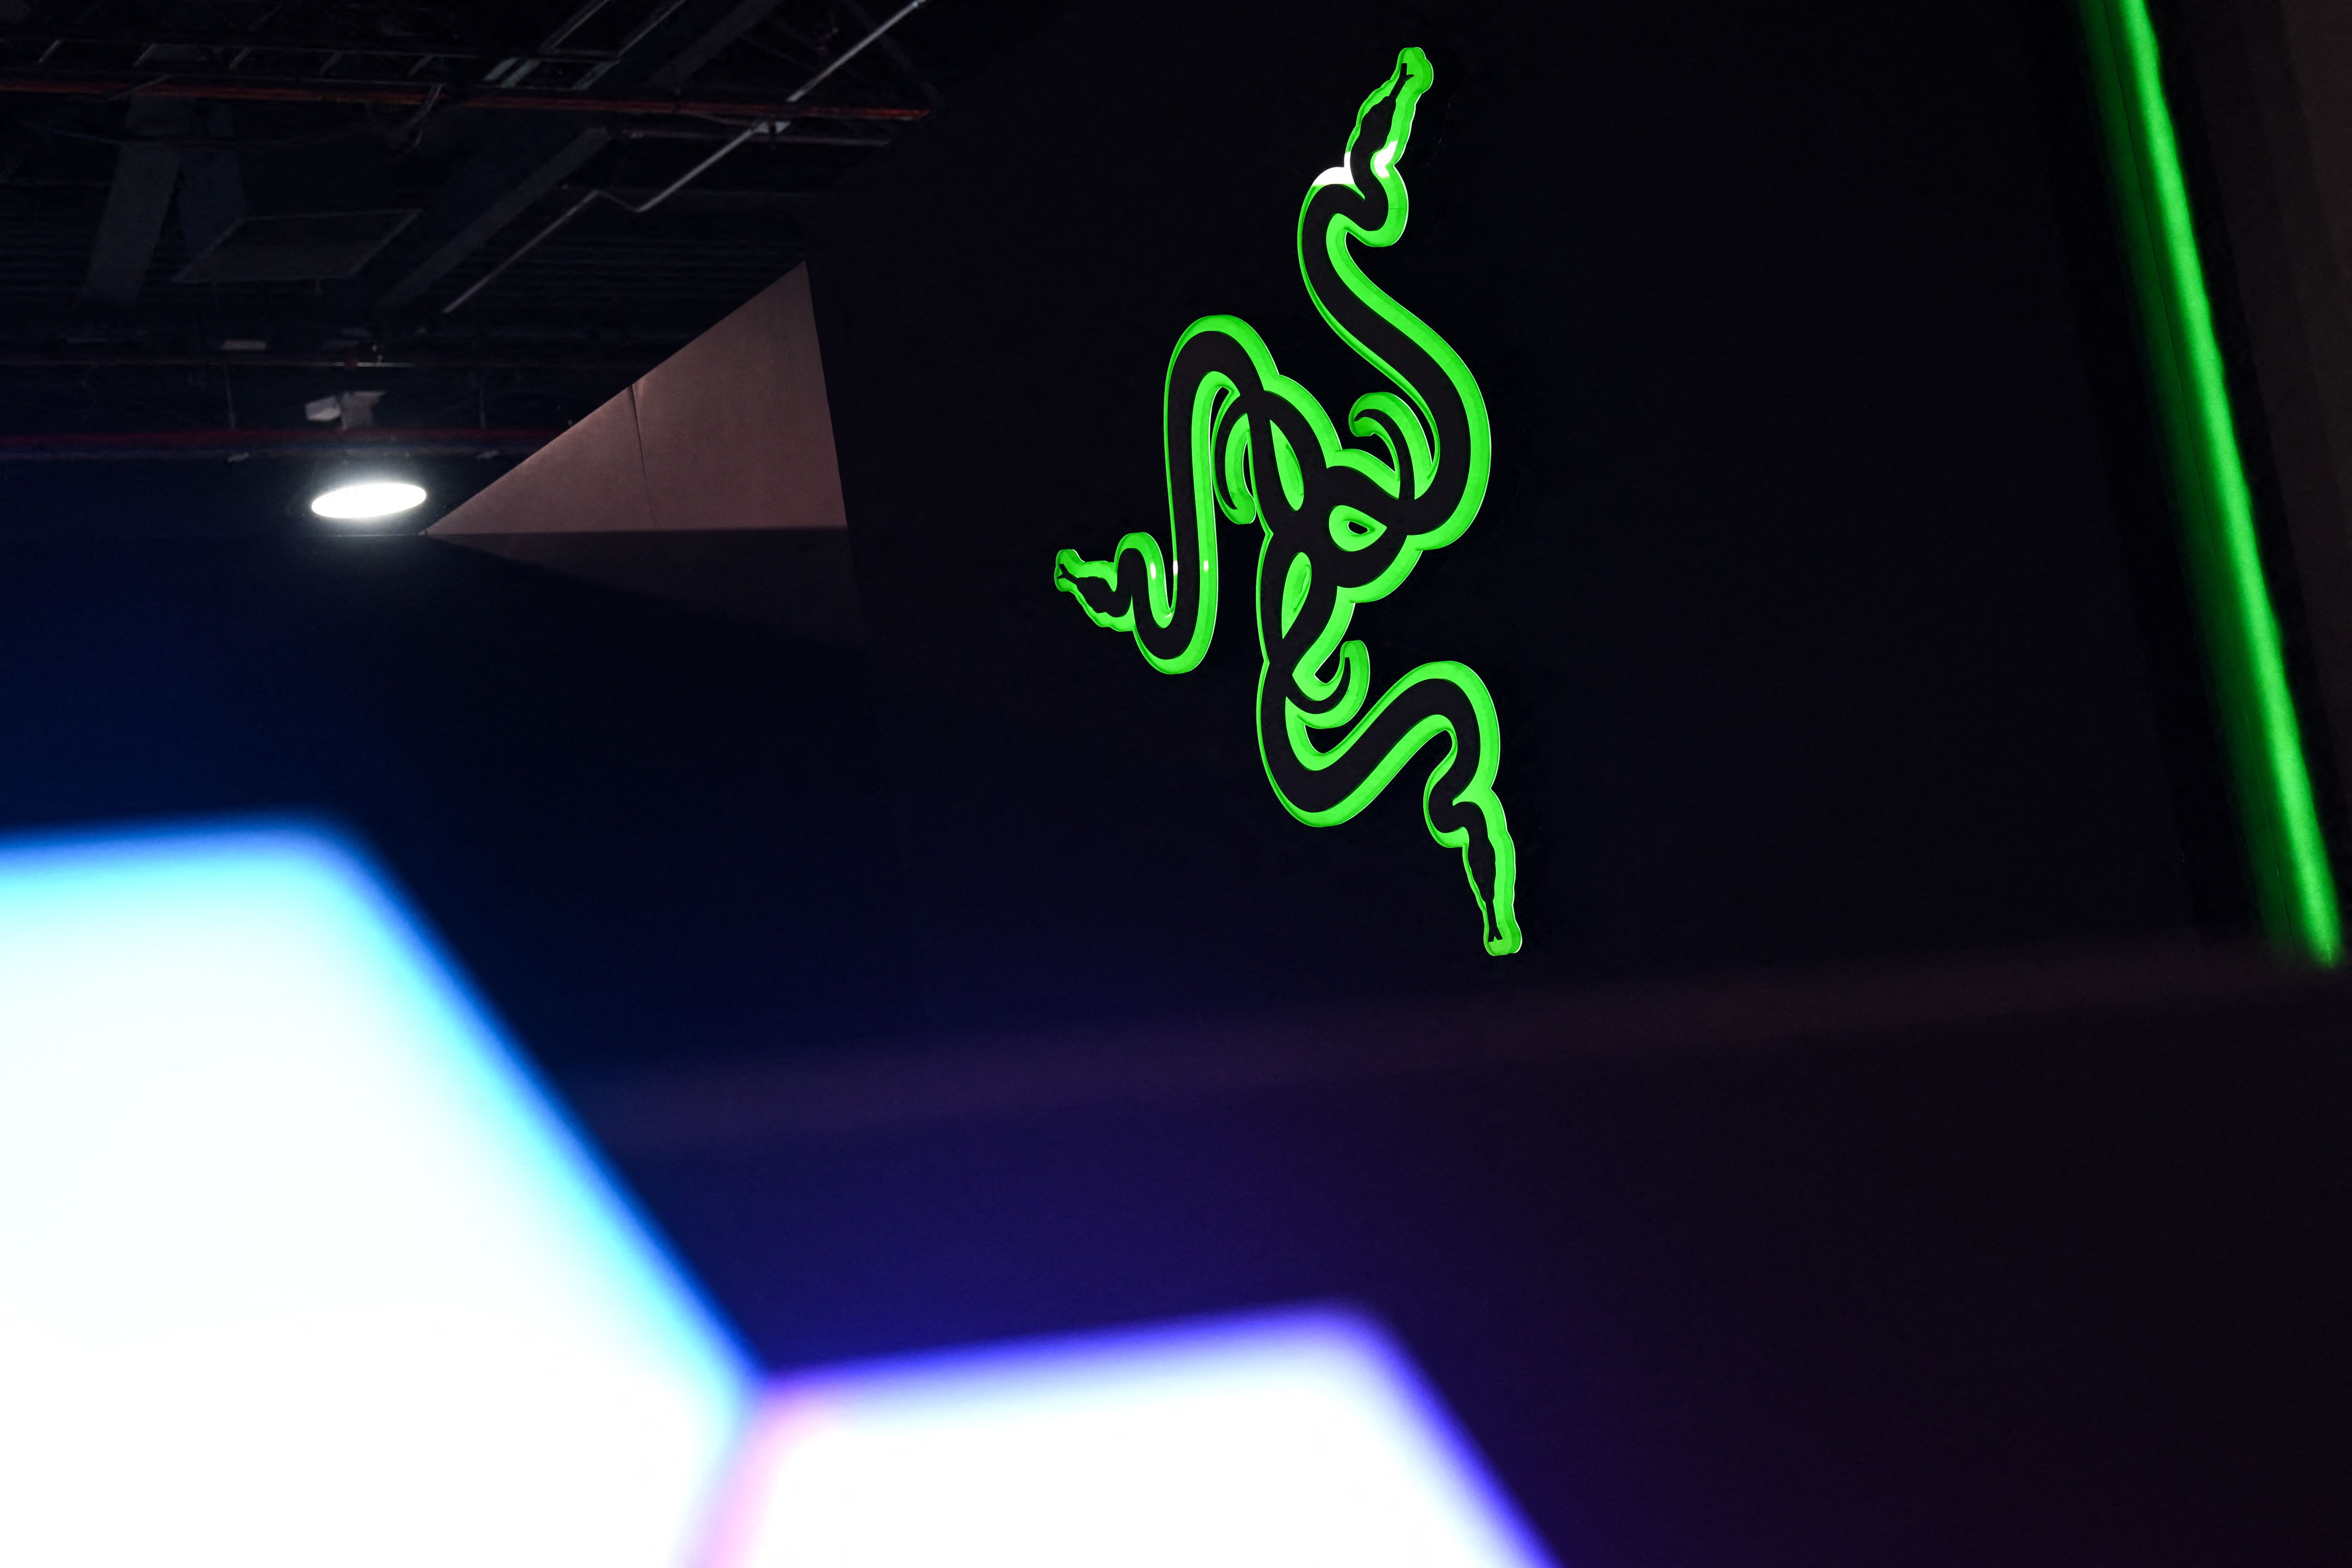 he Razer Inc. logo is displayed at the companys booth during the Consumer Electronics Show (CES) in Las Vegas, Nevada, on January 6, 2023. (Photo by Patrick T. Fallon / AFP)